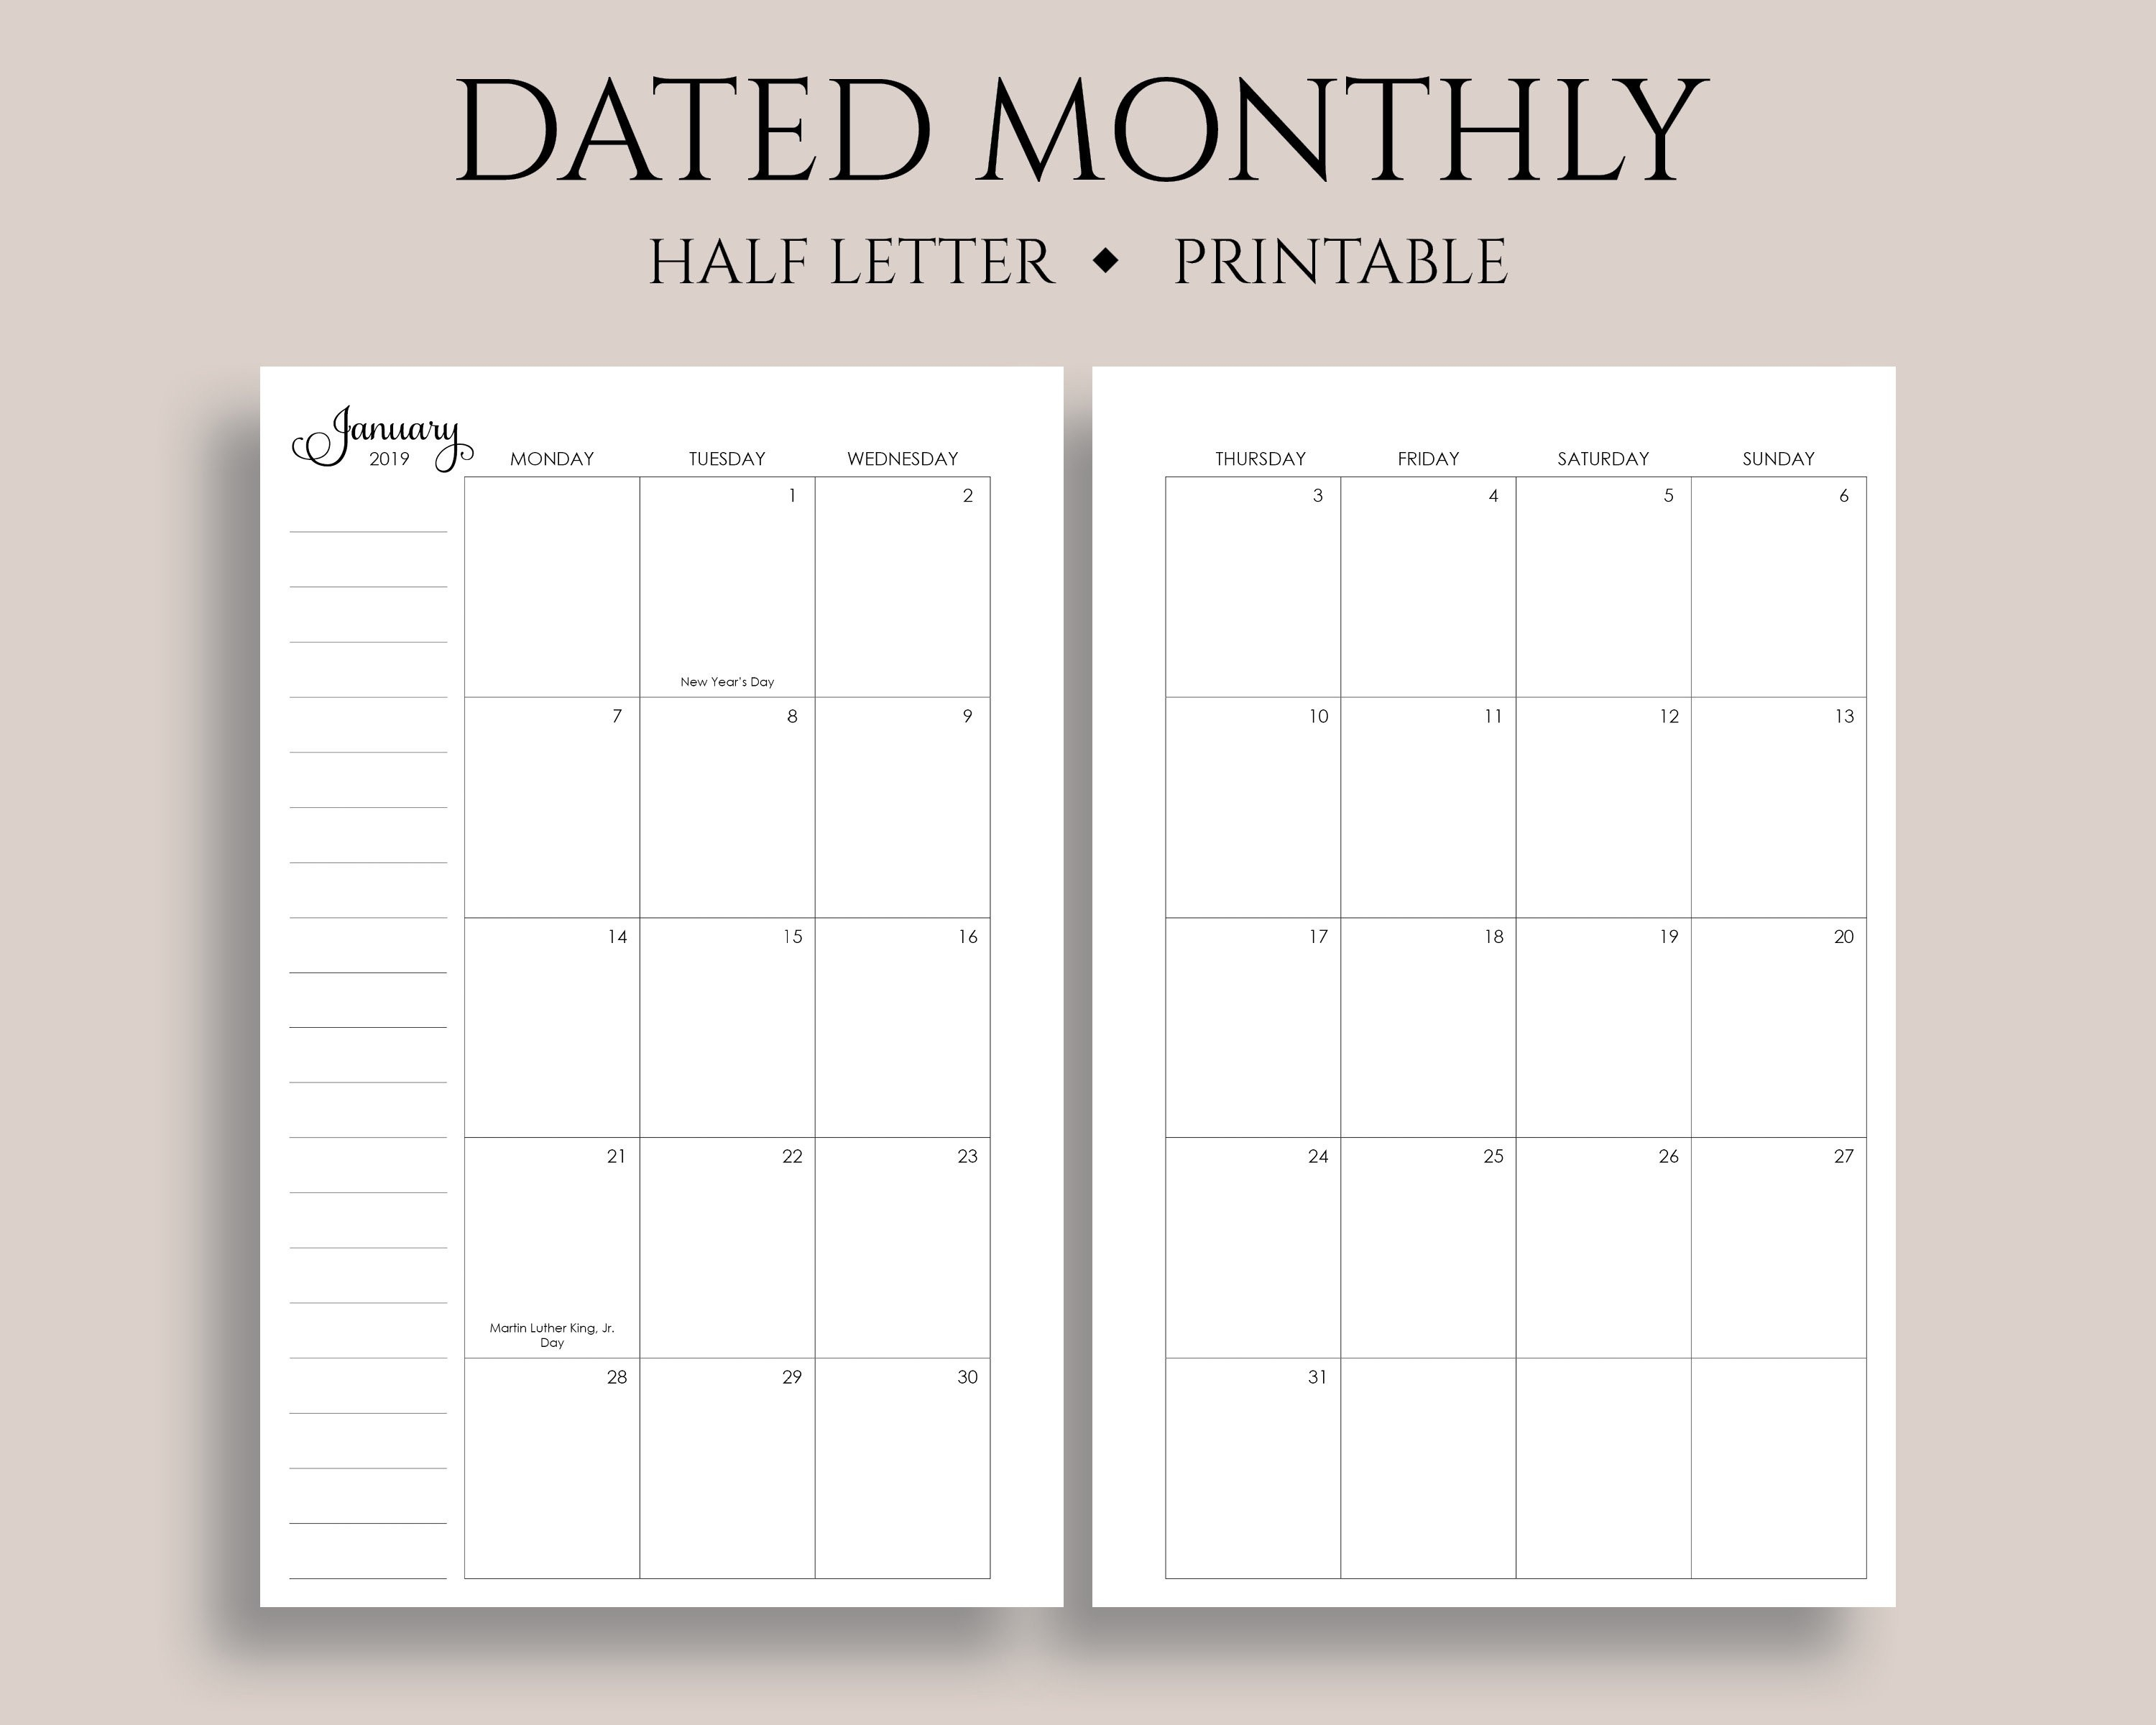 2019 Dated Monthly Calendar Printable Planner Inserts Monday-Printable 5.5 X 8.5 Monthly Calendar